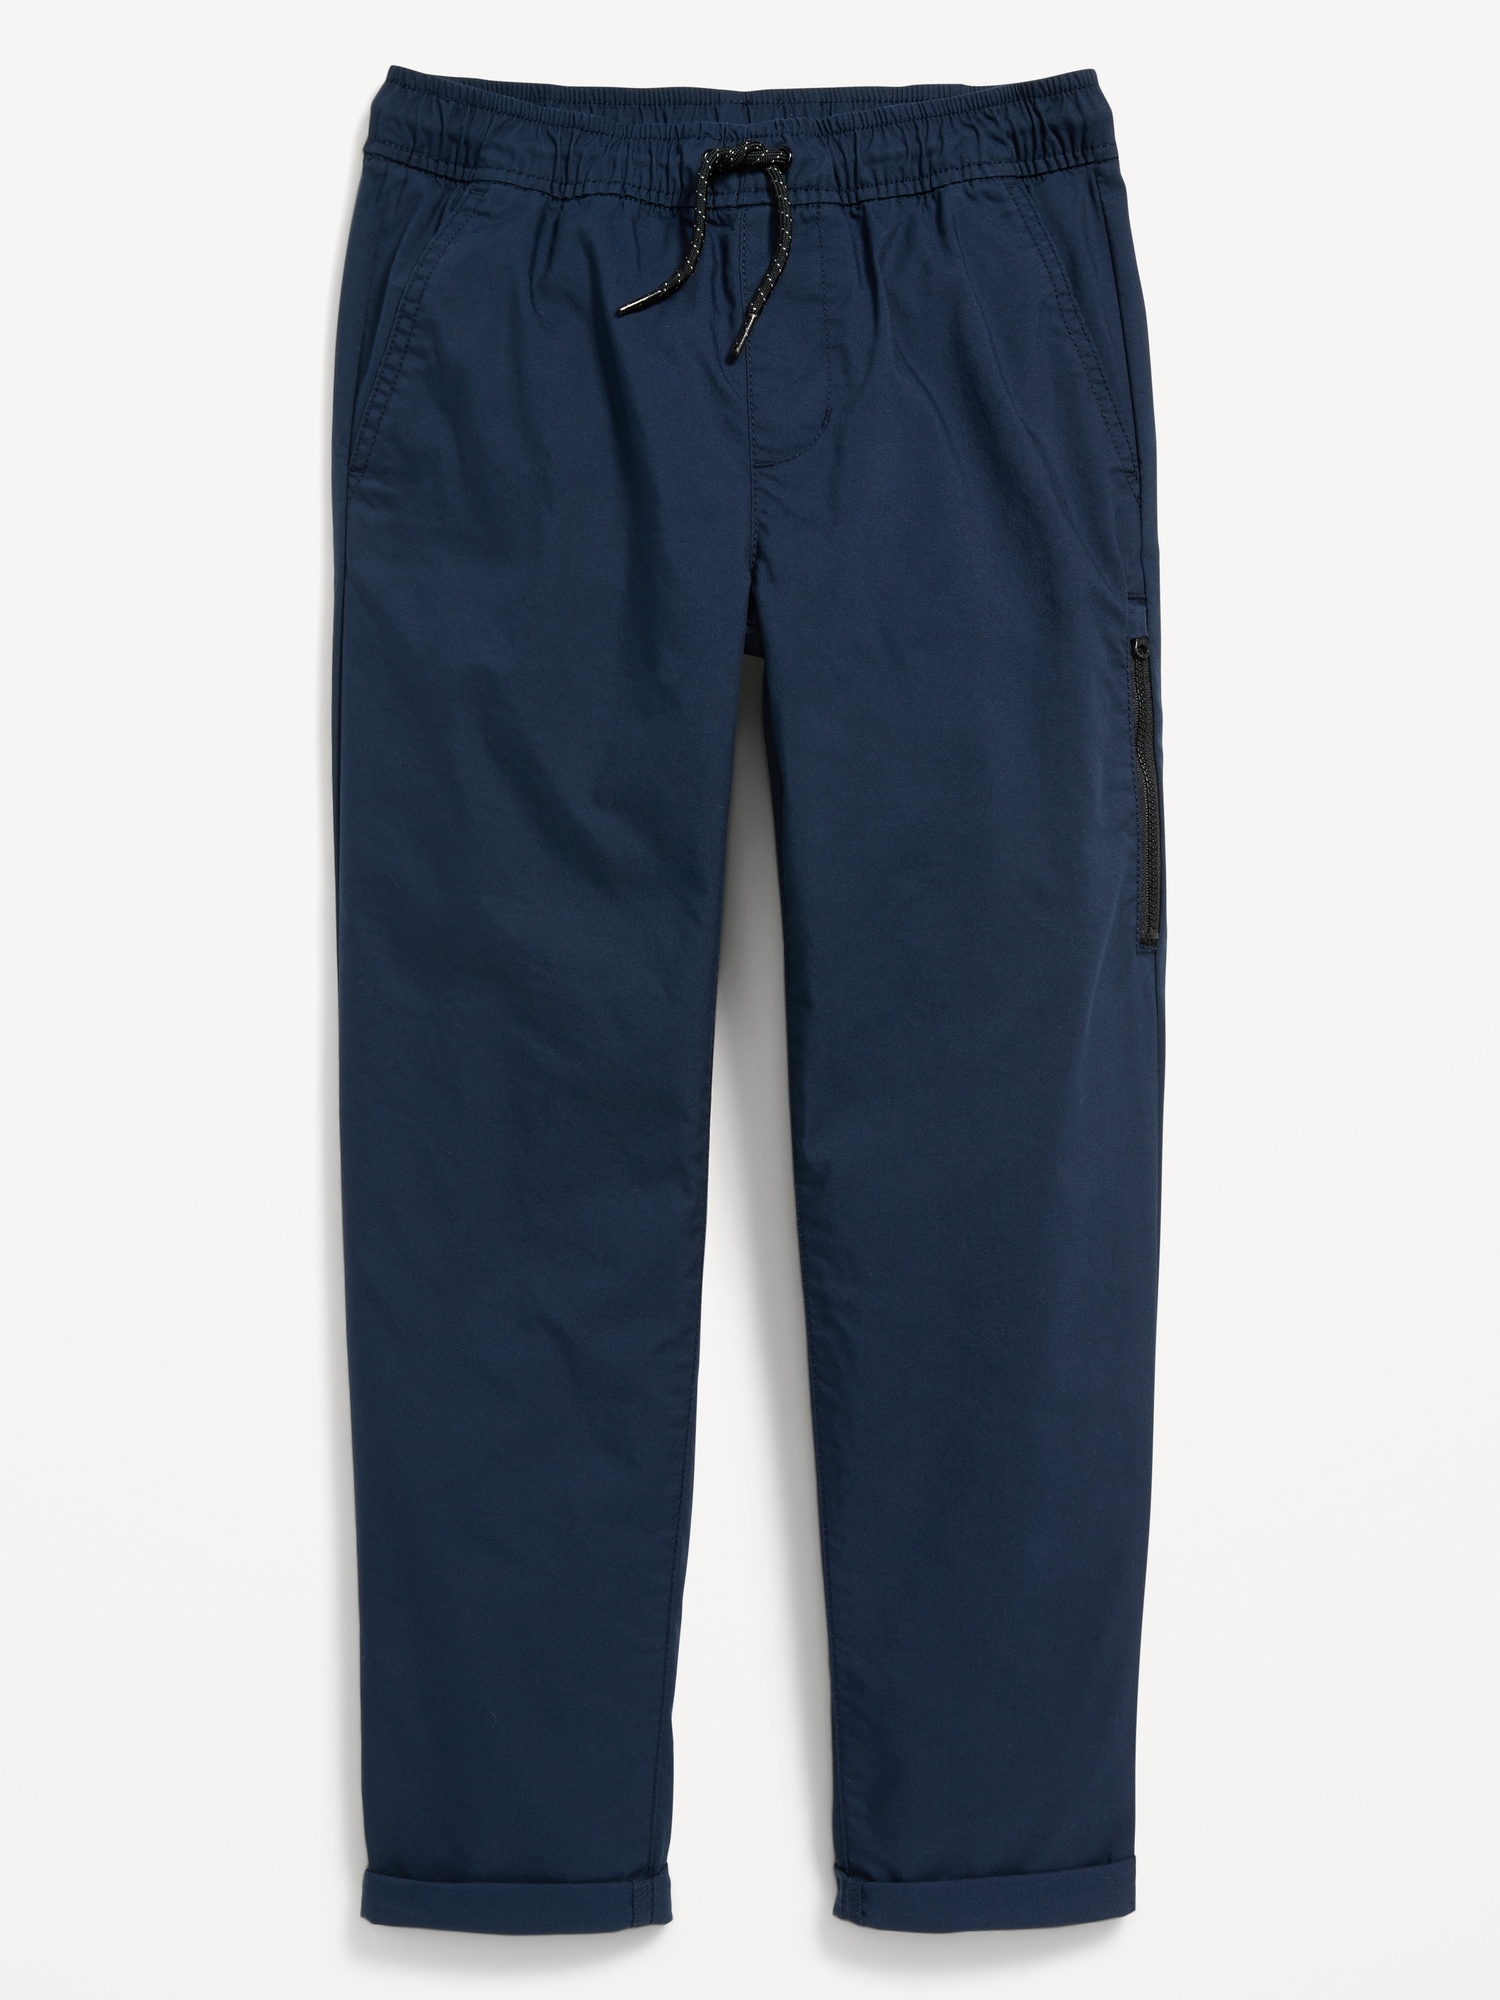 Tapered Corduroy Pants for Boys  Old Navy